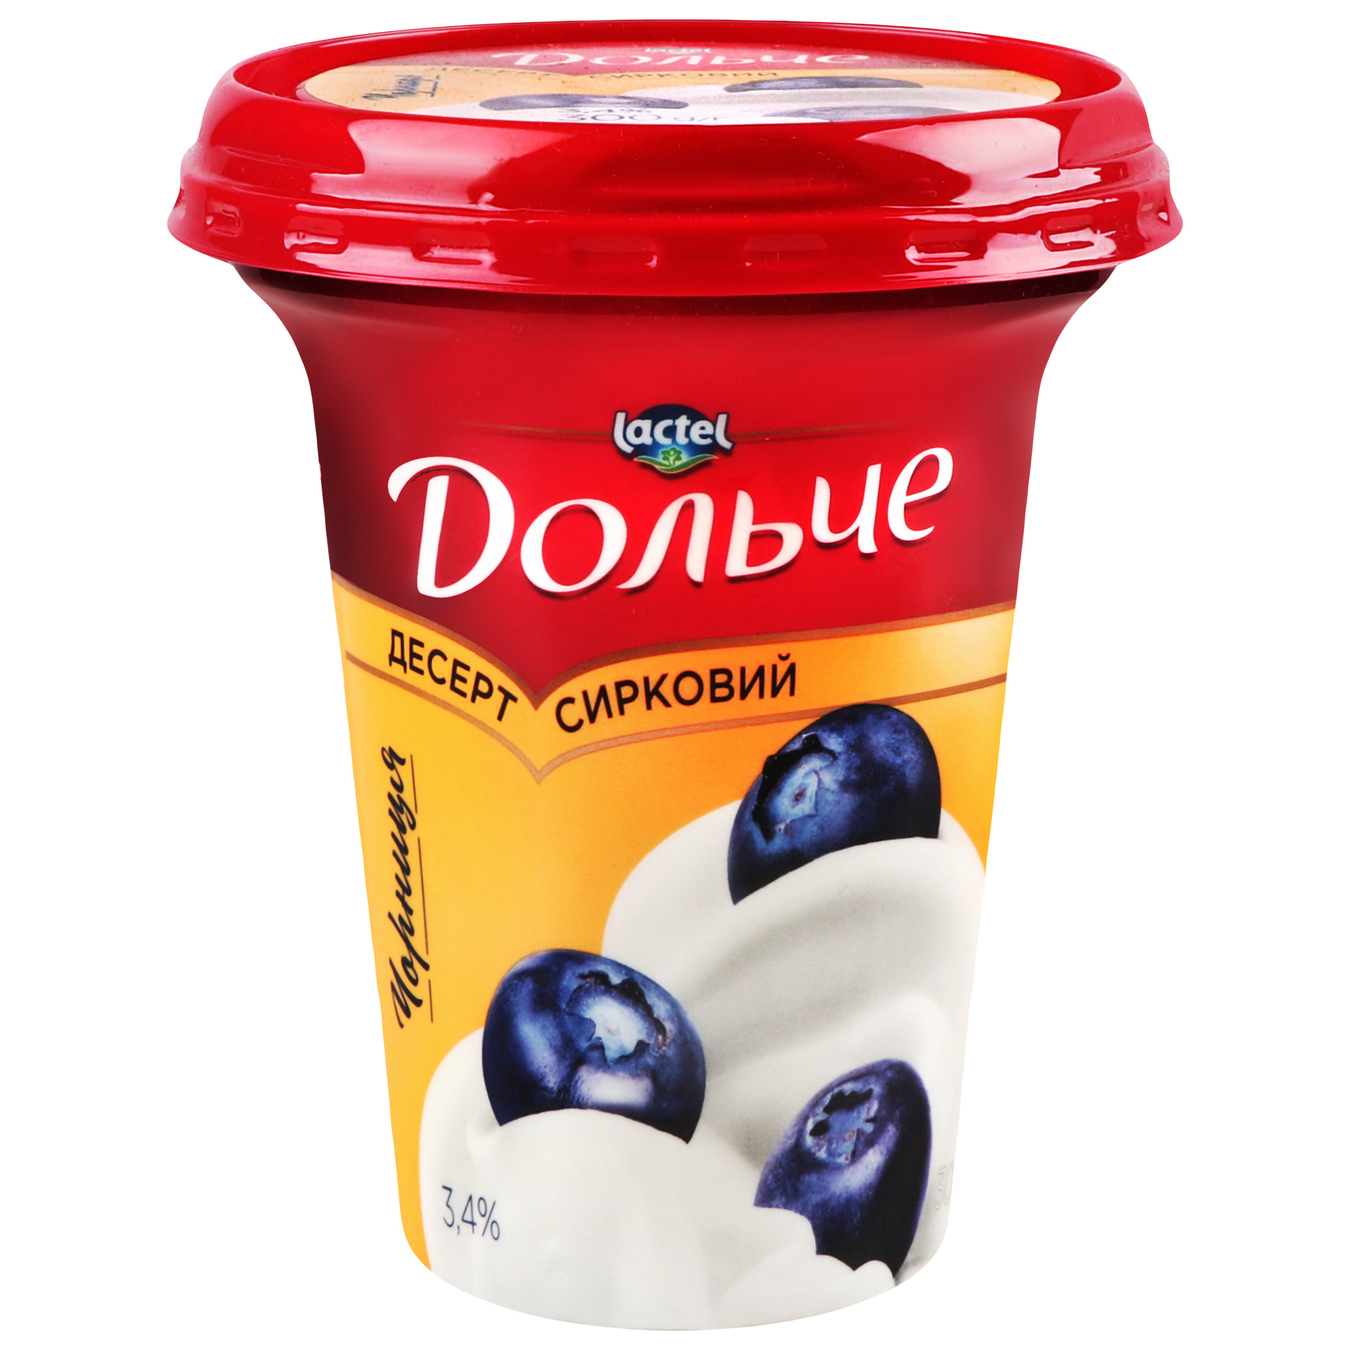 Cheese dessert Dolce with blueberry filling 3.4% 300g 3